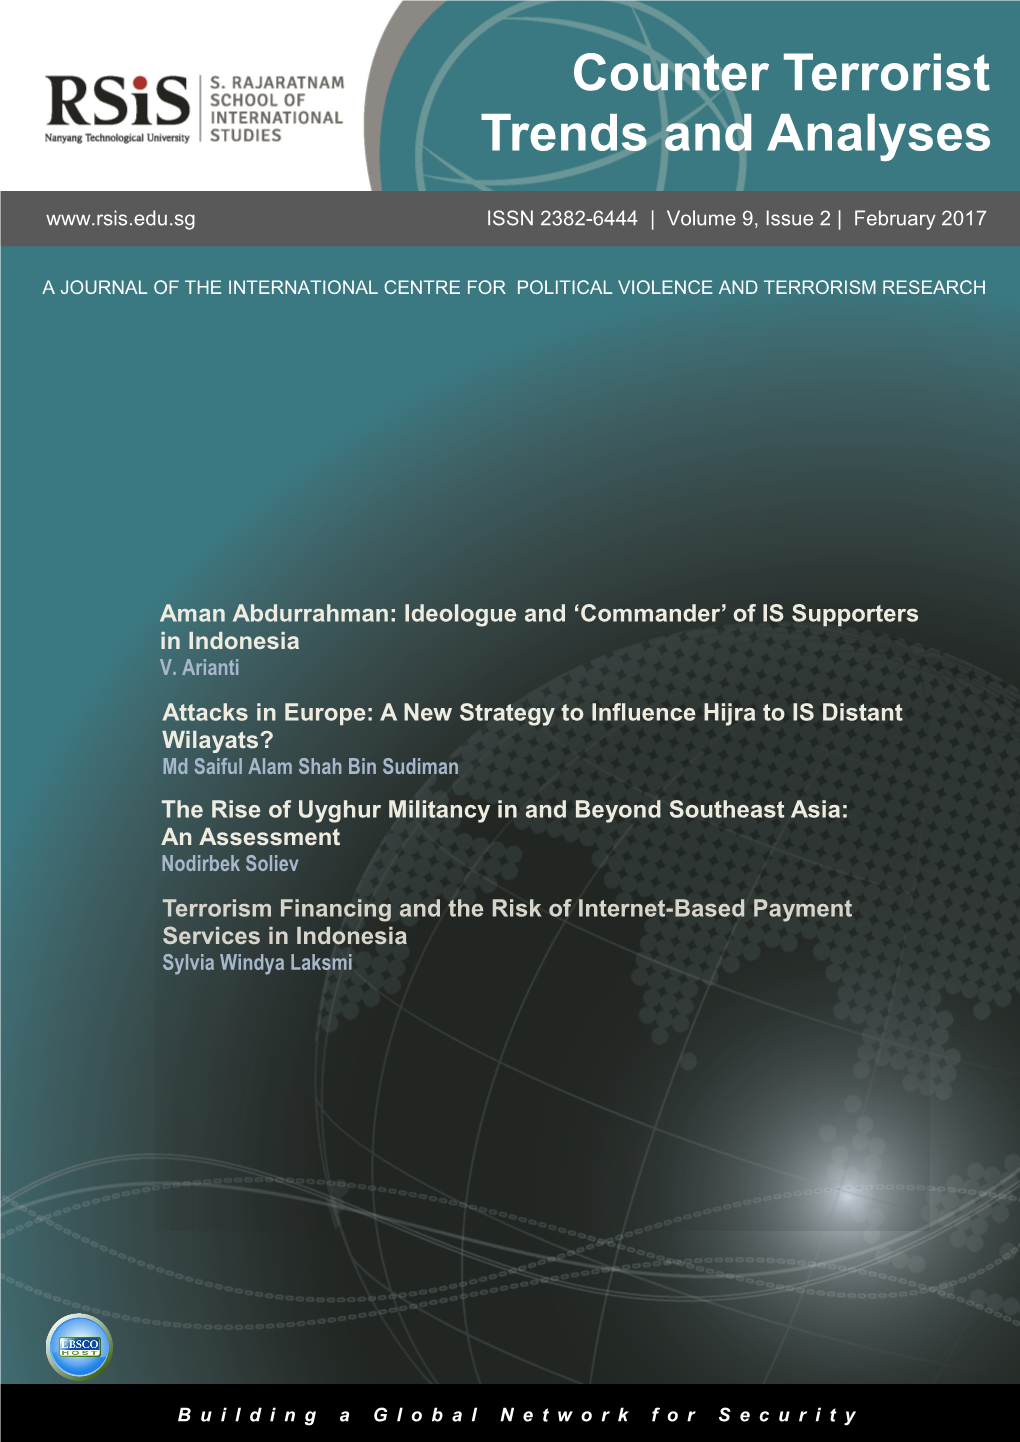 Counter Terrorist Trends and Analyses ISSN 2382-6444 | Volume 9, Issue 2 | February 2017